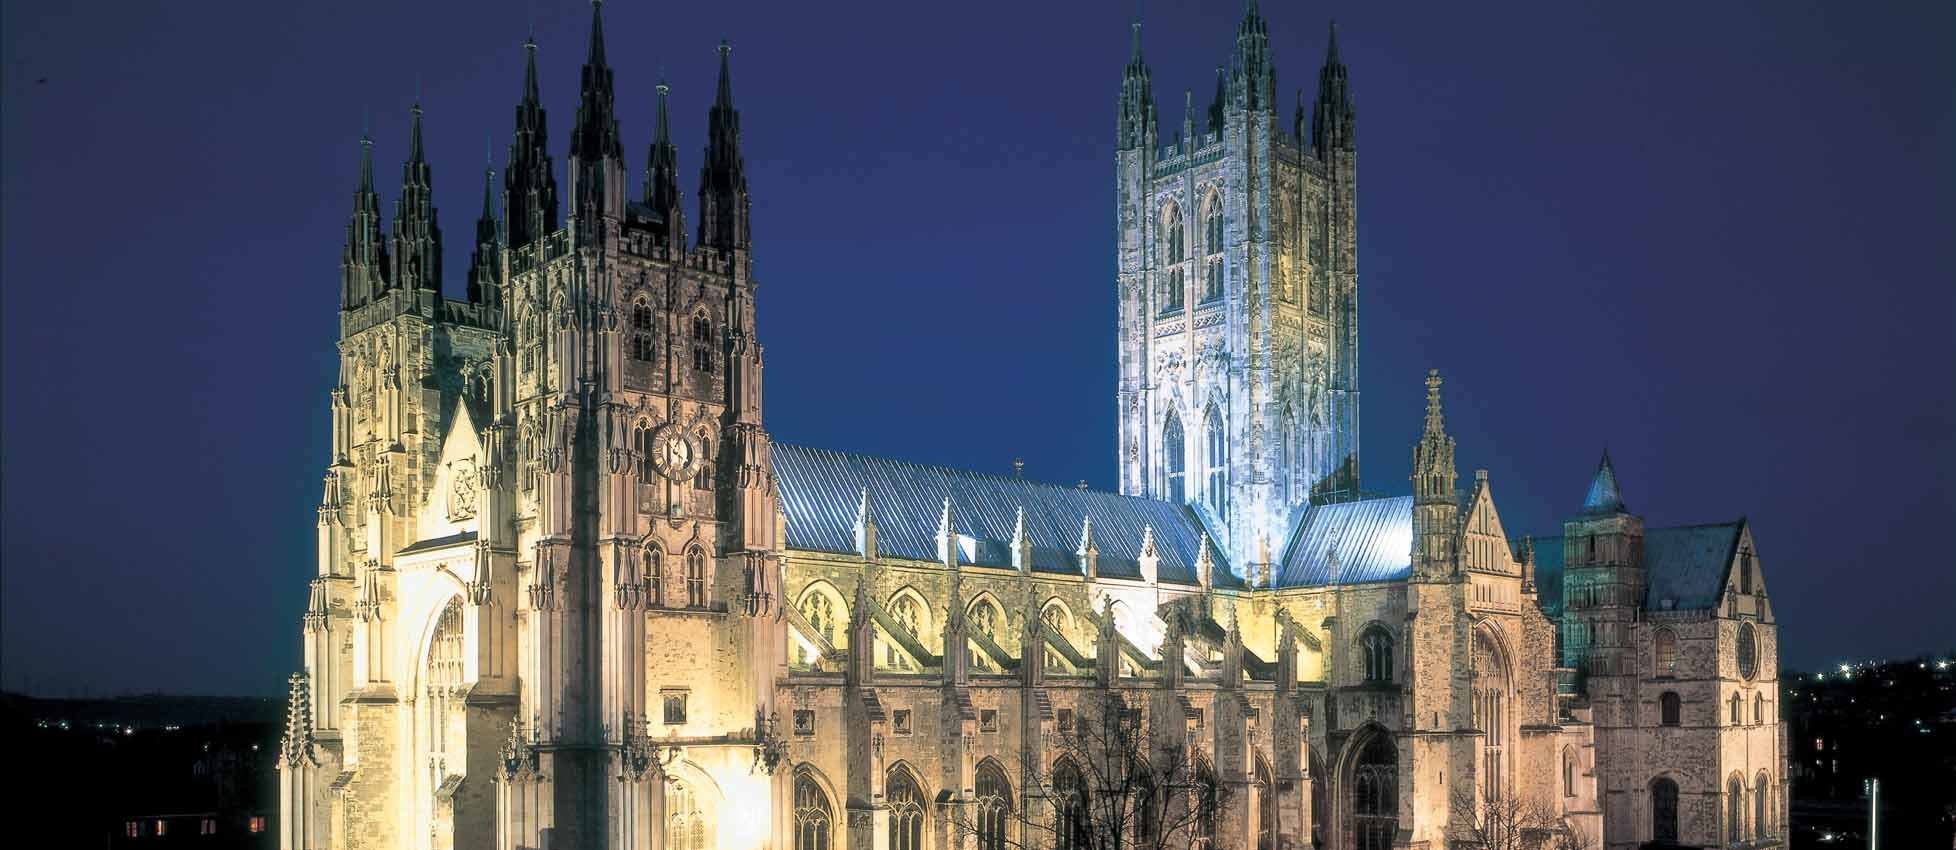 Canterbury Cathedral #2